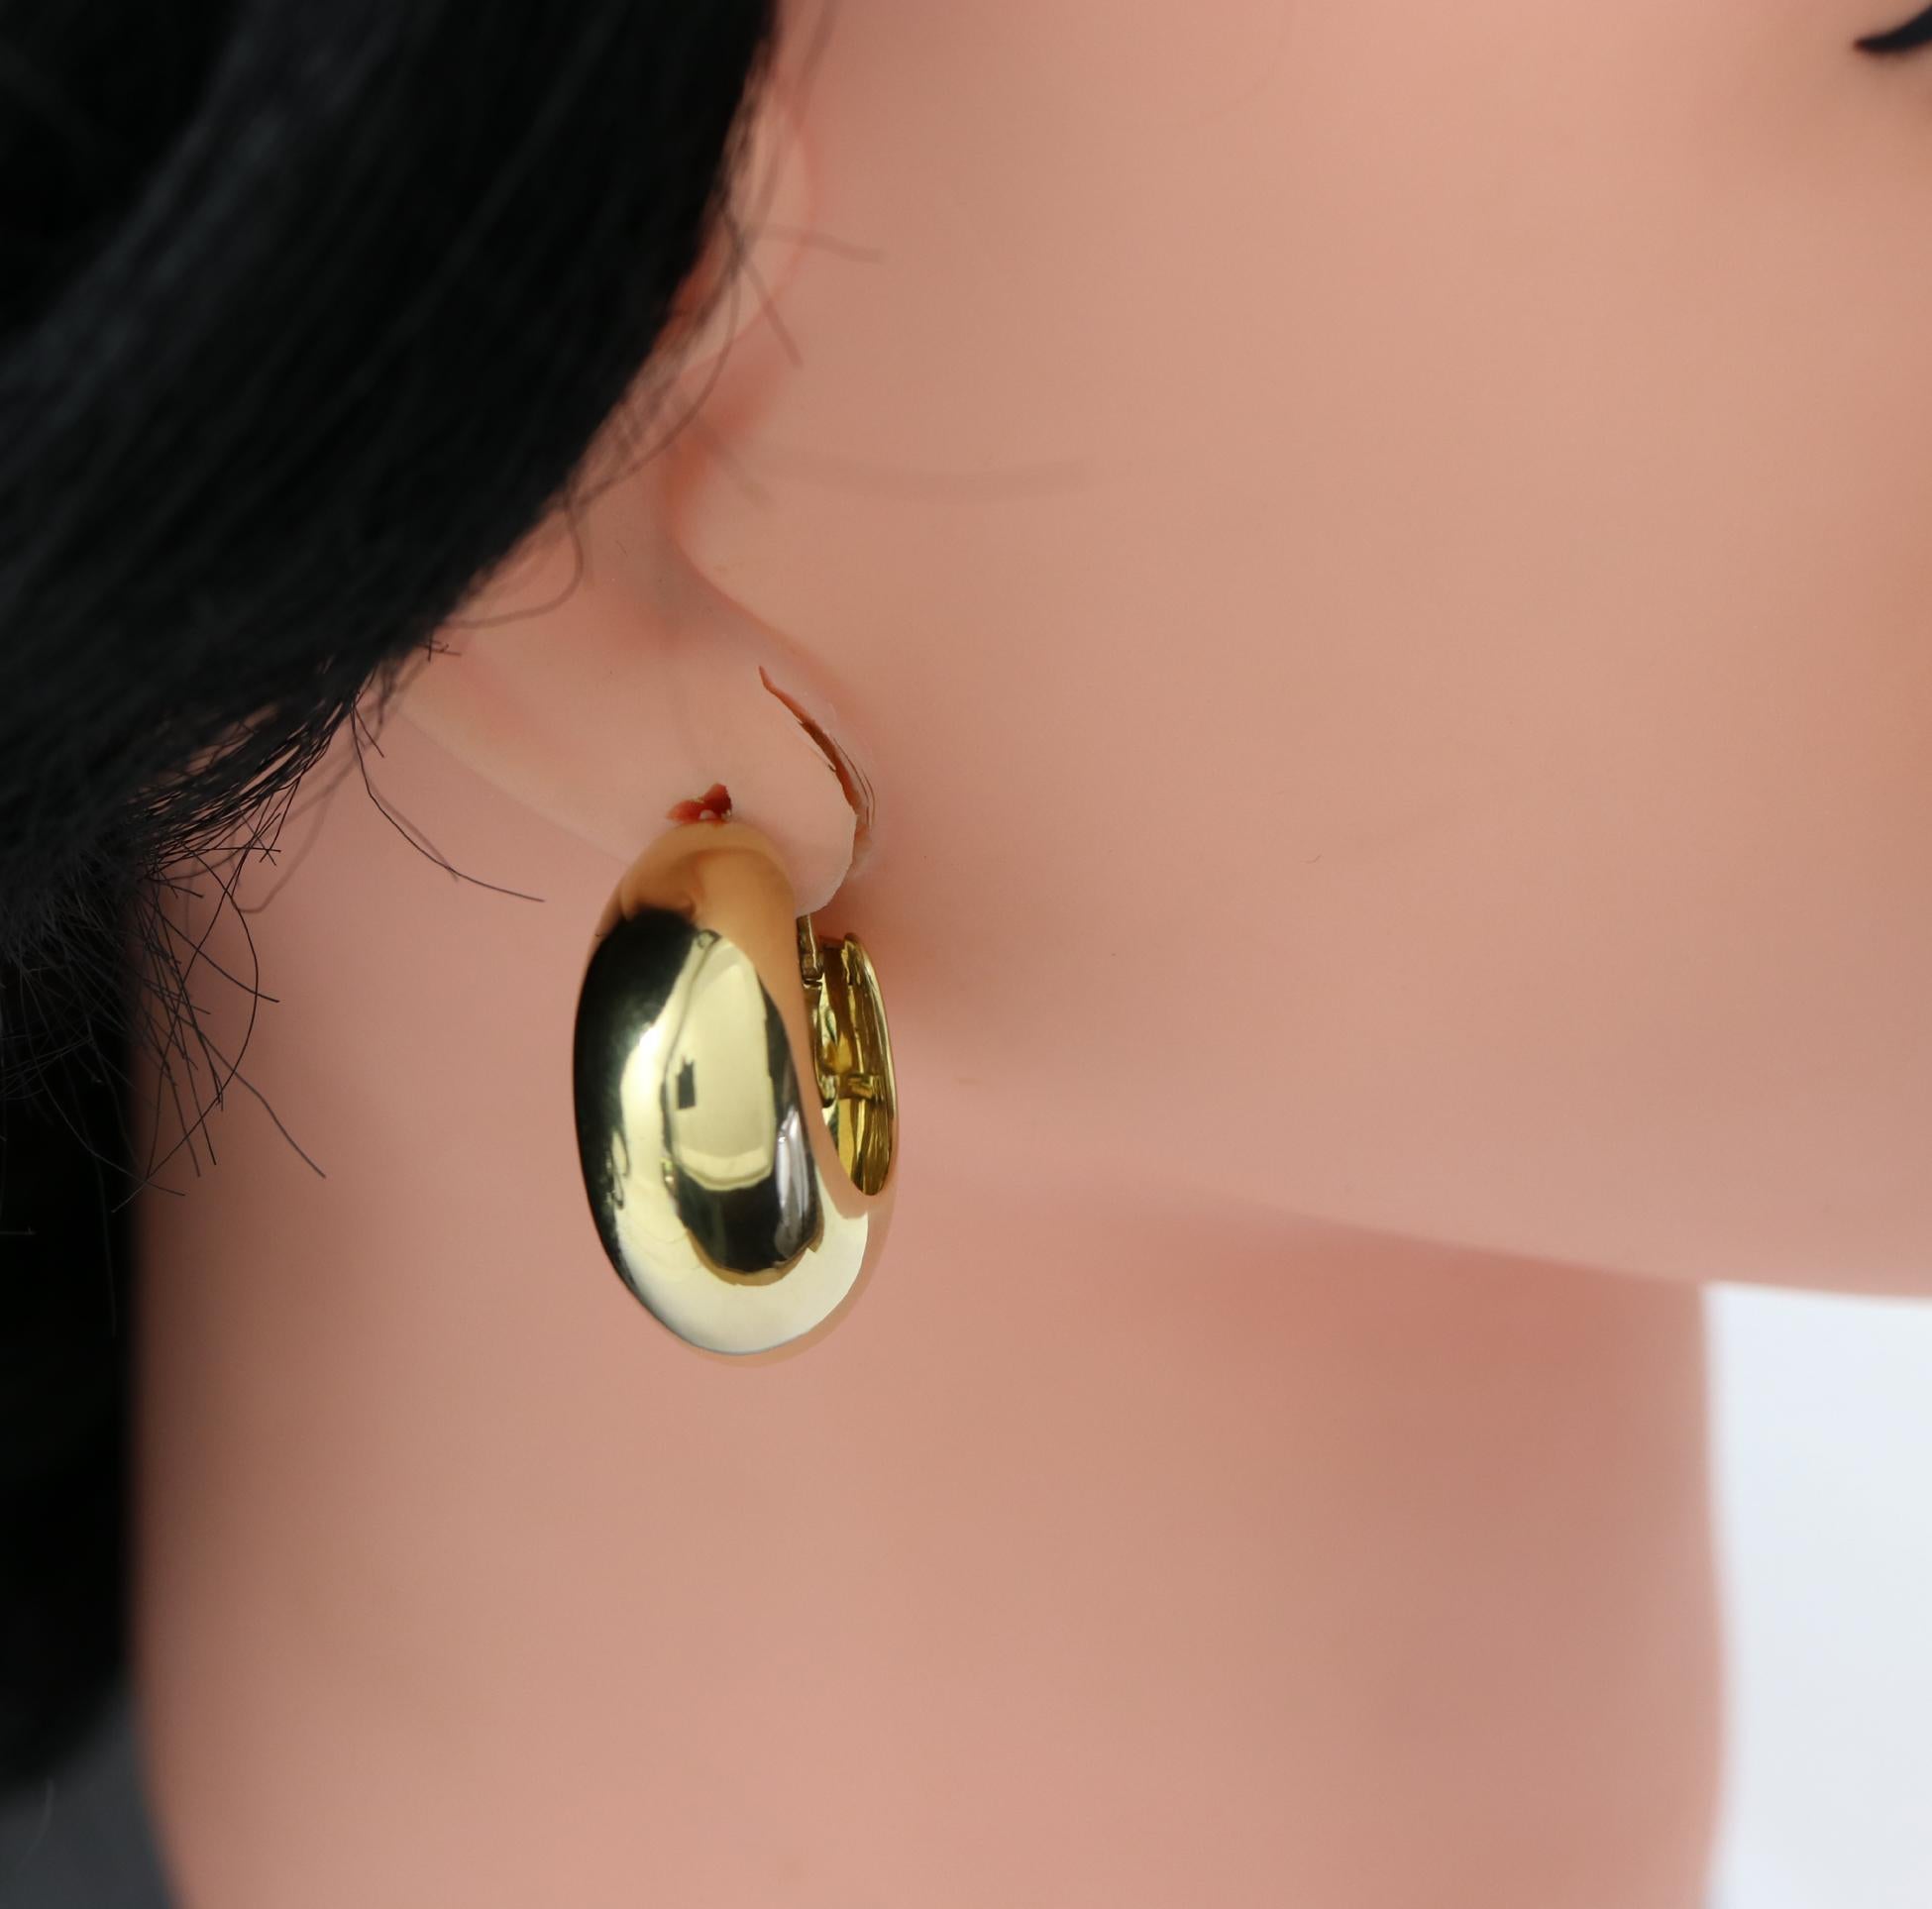 A pair of high polished 18K yellow gold hoop earrings measuring 1/2 an inch wide, and 1 3/16 inches in diameter. Perfect for daytime or casual wear with a classy look. Signed 